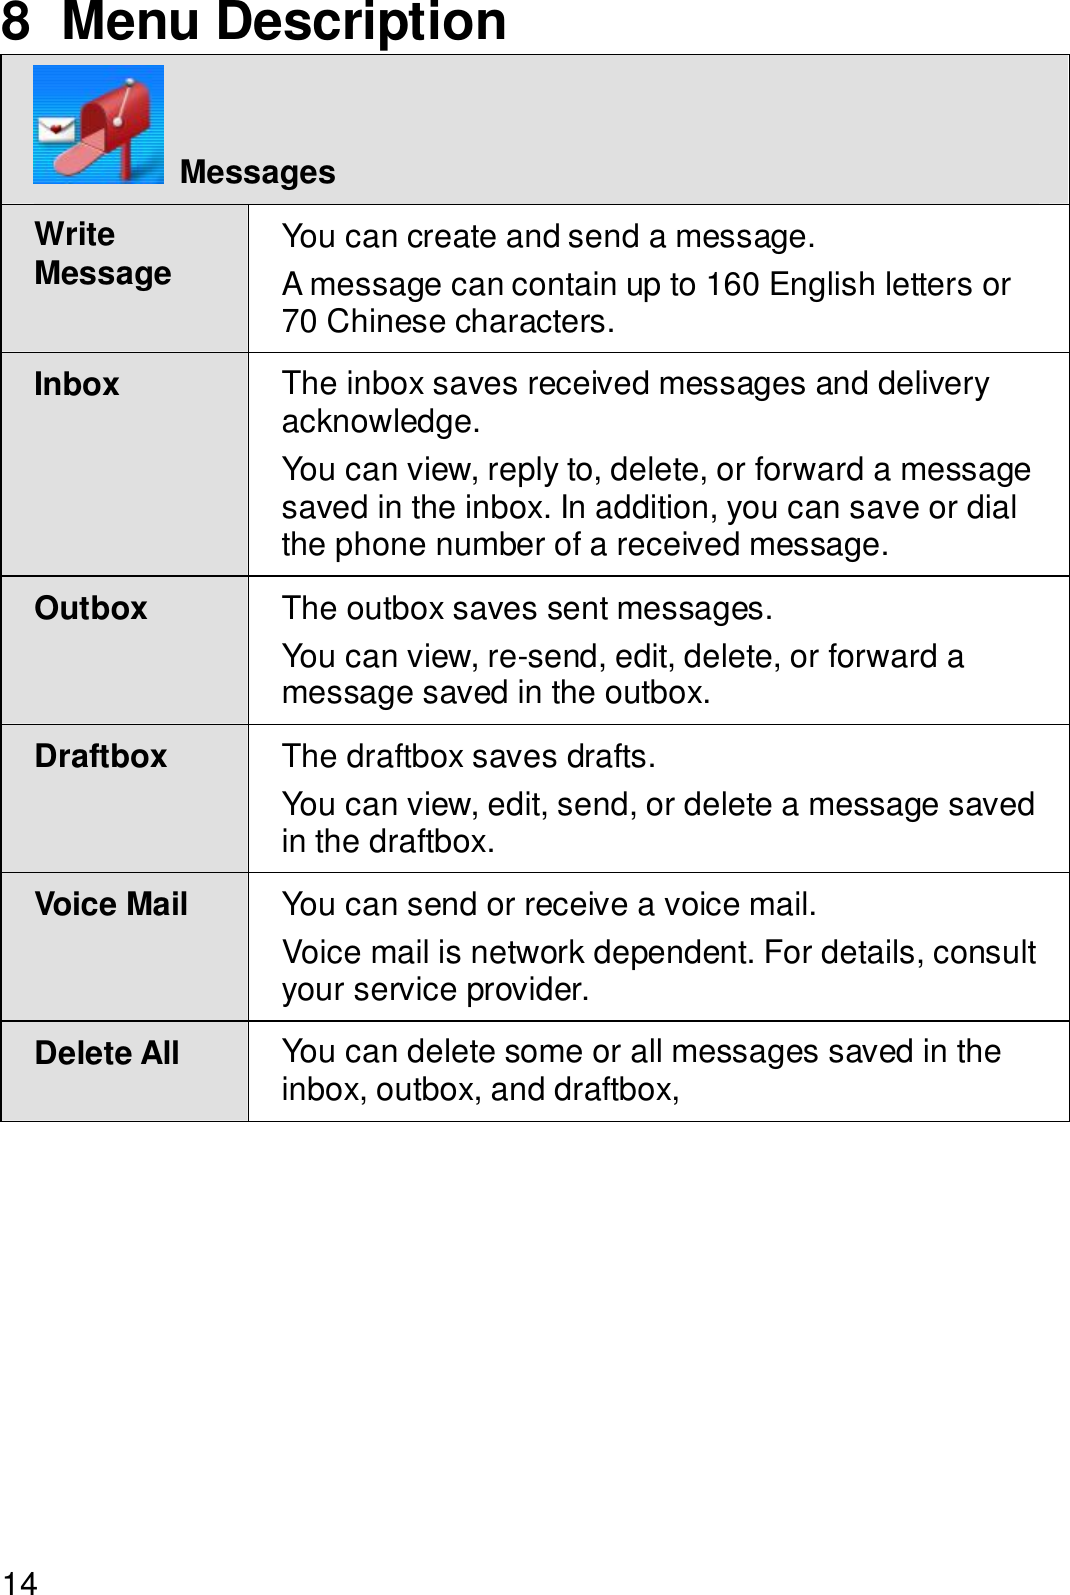  14 8  Menu Description  Messages Write Message  You can create and send a message. A message can contain up to 160 English letters or 70 Chinese characters. Inbox  The inbox saves received messages and delivery acknowledge. You can view, reply to, delete, or forward a message saved in the inbox. In addition, you can save or dial the phone number of a received message. Outbox  The outbox saves sent messages. You can view, re-send, edit, delete, or forward a message saved in the outbox. Draftbox  The draftbox saves drafts. You can view, edit, send, or delete a message saved in the draftbox. Voice Mail  You can send or receive a voice mail. Voice mail is network dependent. For details, consult your service provider.  Delete All  You can delete some or all messages saved in the inbox, outbox, and draftbox, 